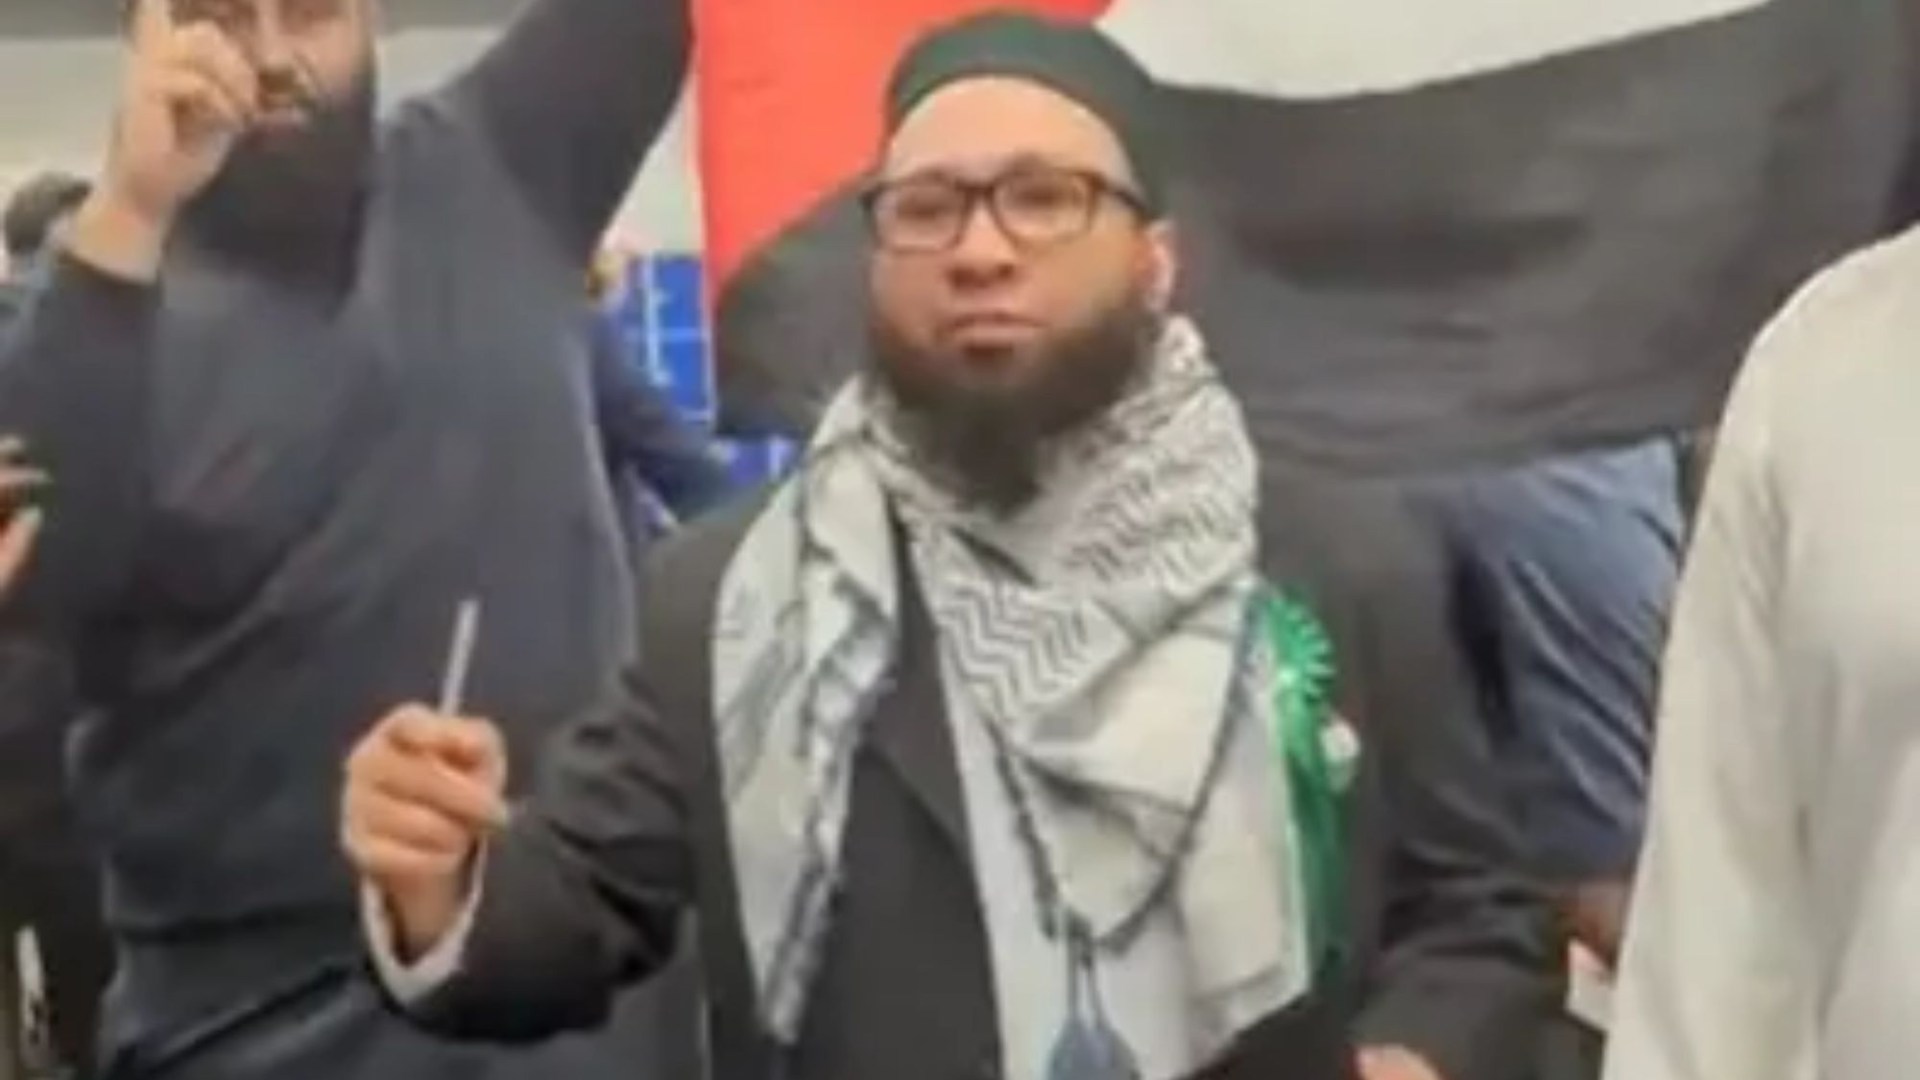 Green Party is investigating pro-Palestine councillor who shouted Allahu Akbar after winning election in Leeds [Video]